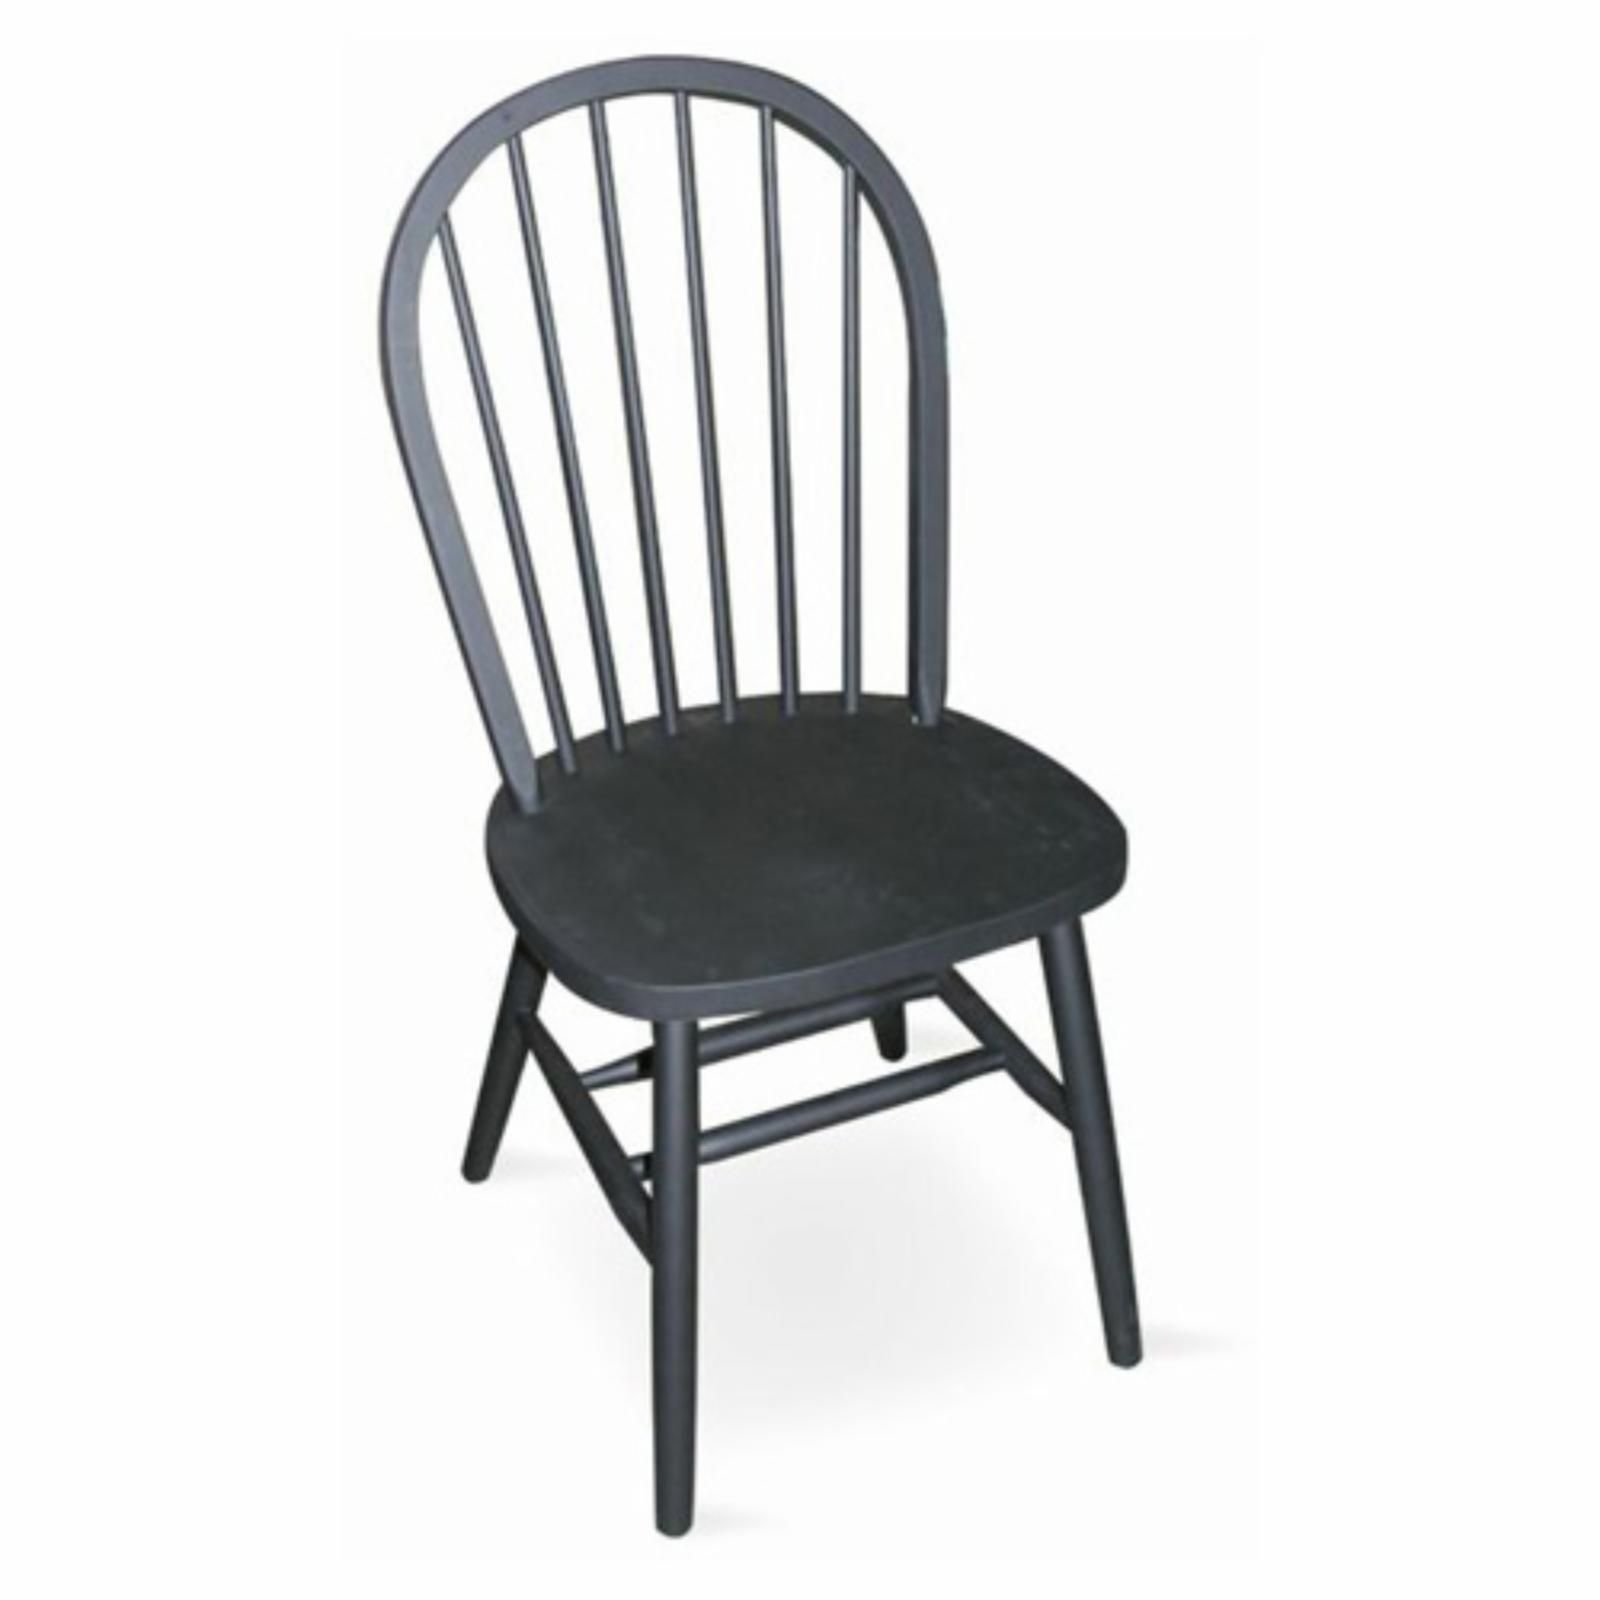 International Concepts Estill Windsor High Spindle Back Dining Chair with Plain Legs Black | Hayneedle